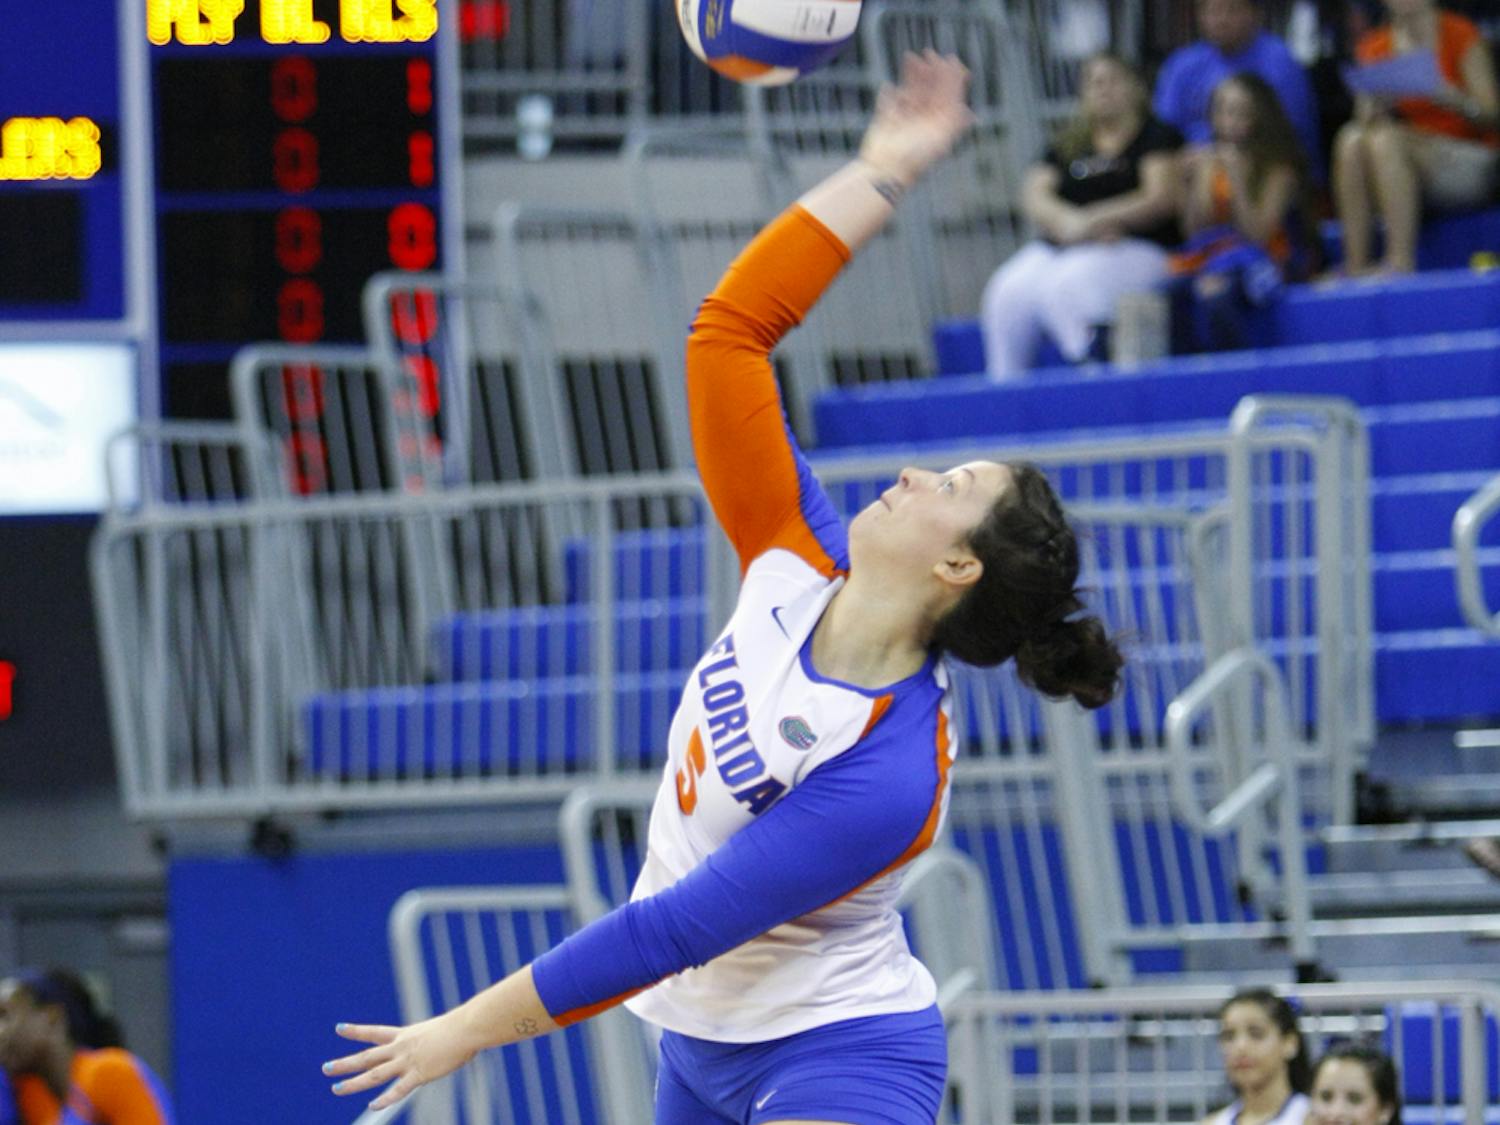 Junior libero Taylor Unroe serves against Florida A&amp;M on Aug. 25, 2012, in the O’Connell Center. UF won the match 3-0.